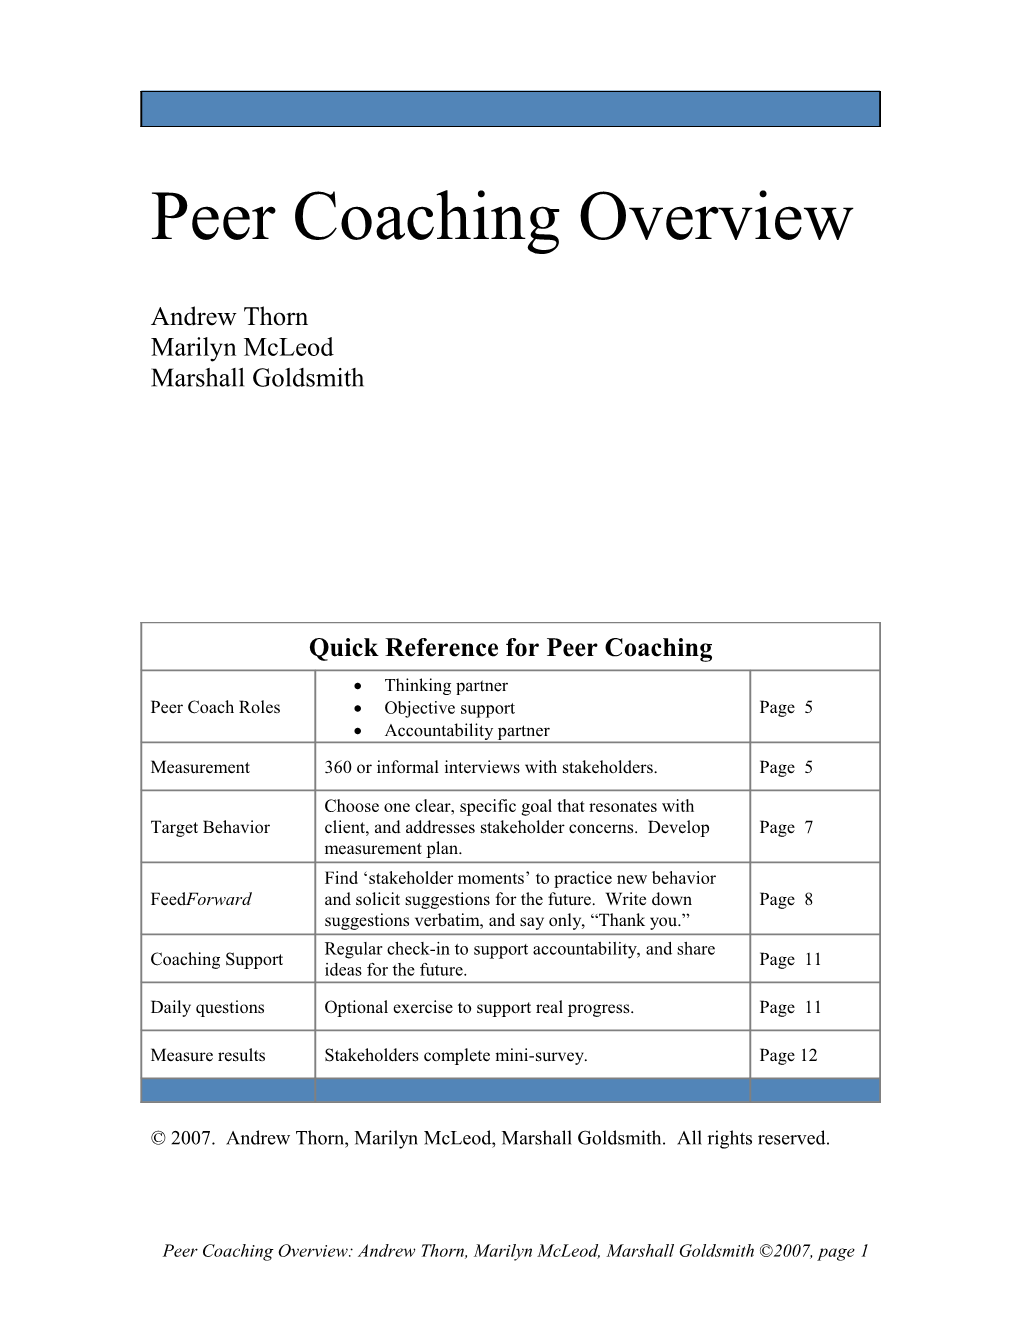 Peer Coaching Overview